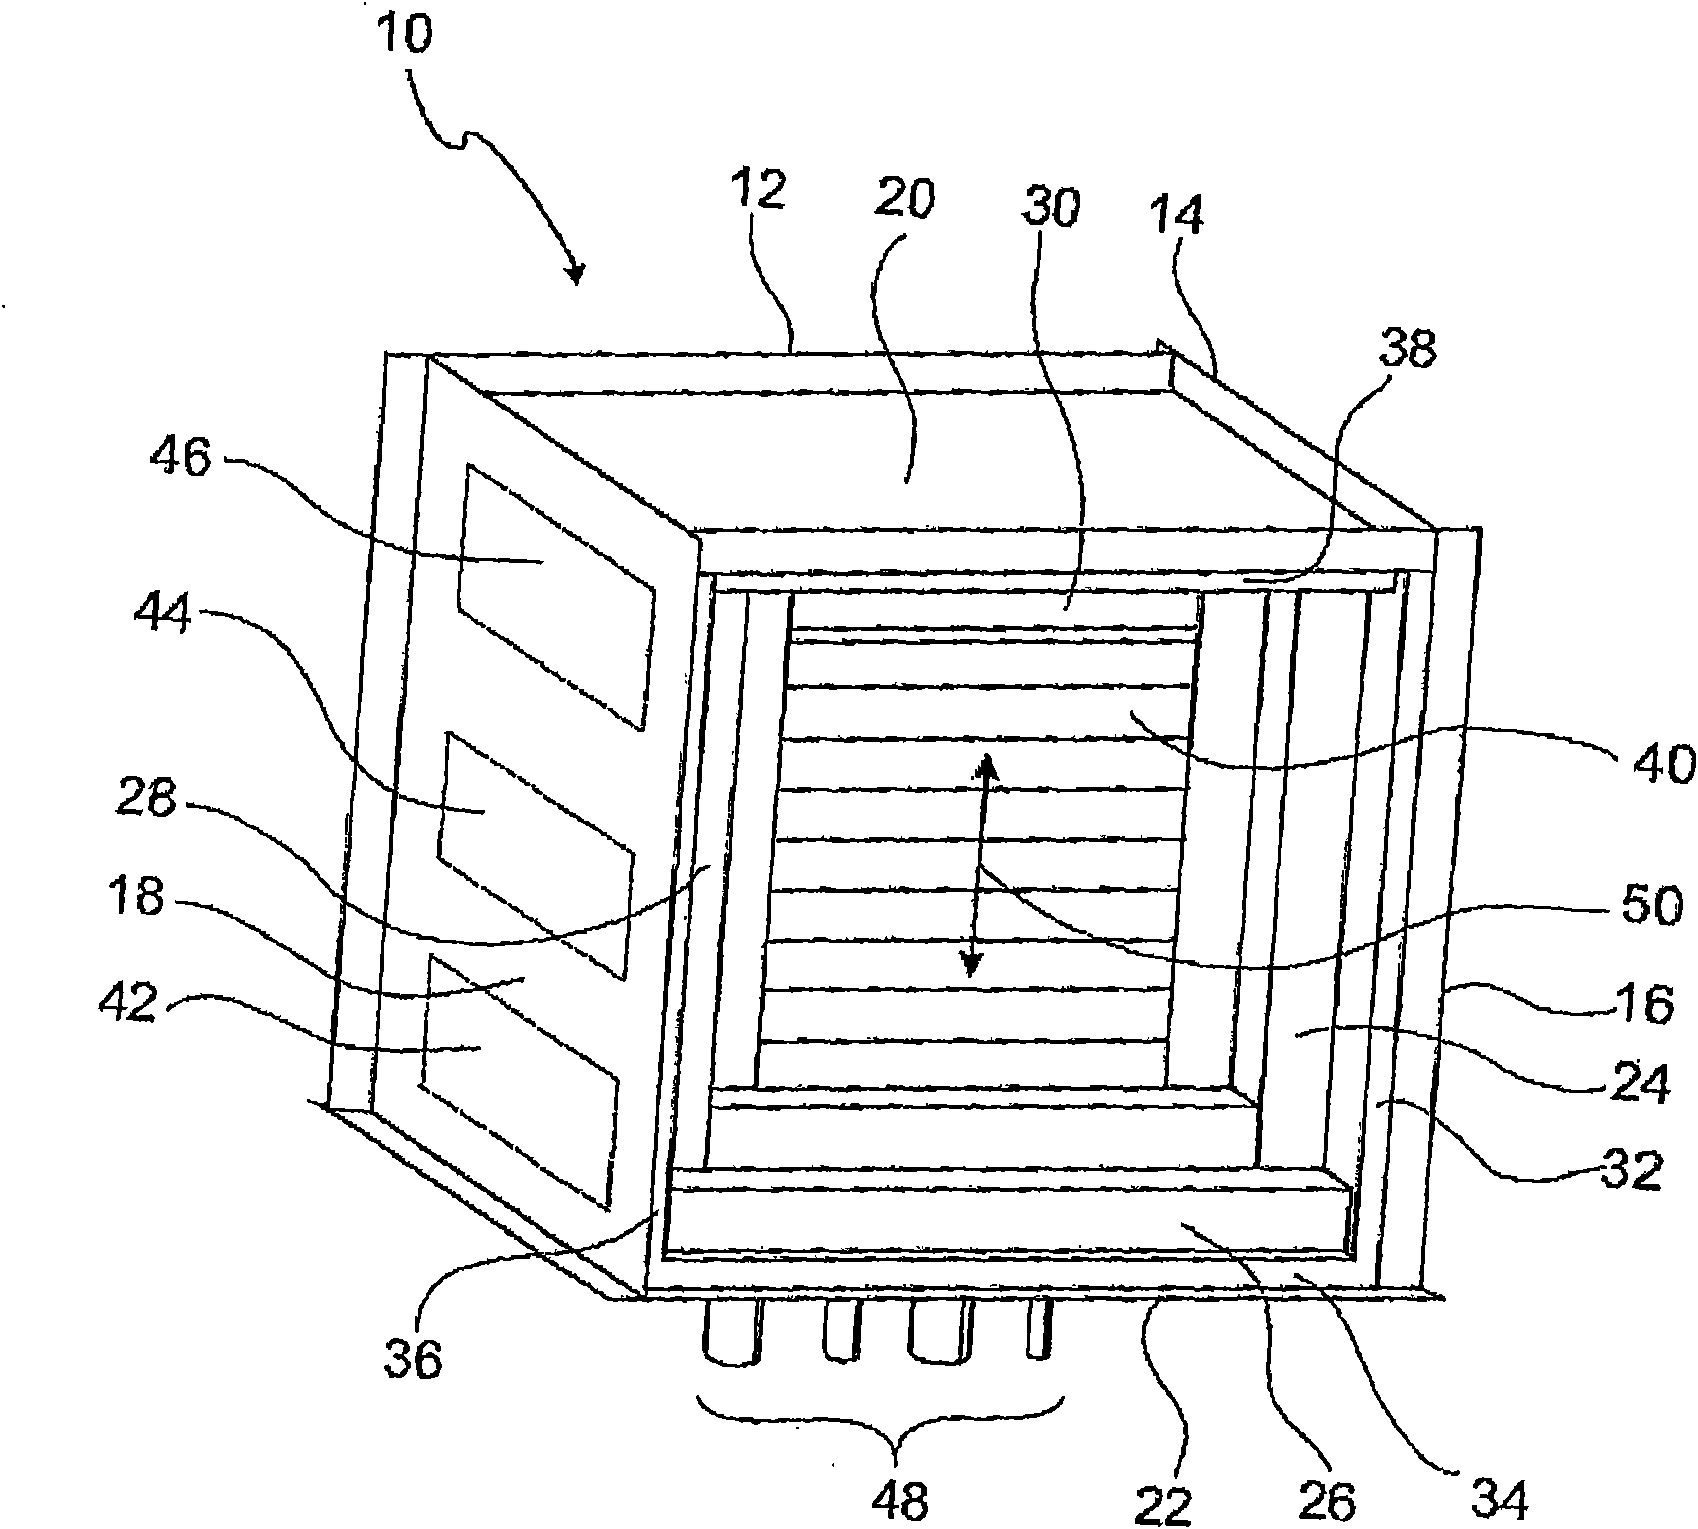 Insulating device and tensioning device for a high temperature fuel cell system component